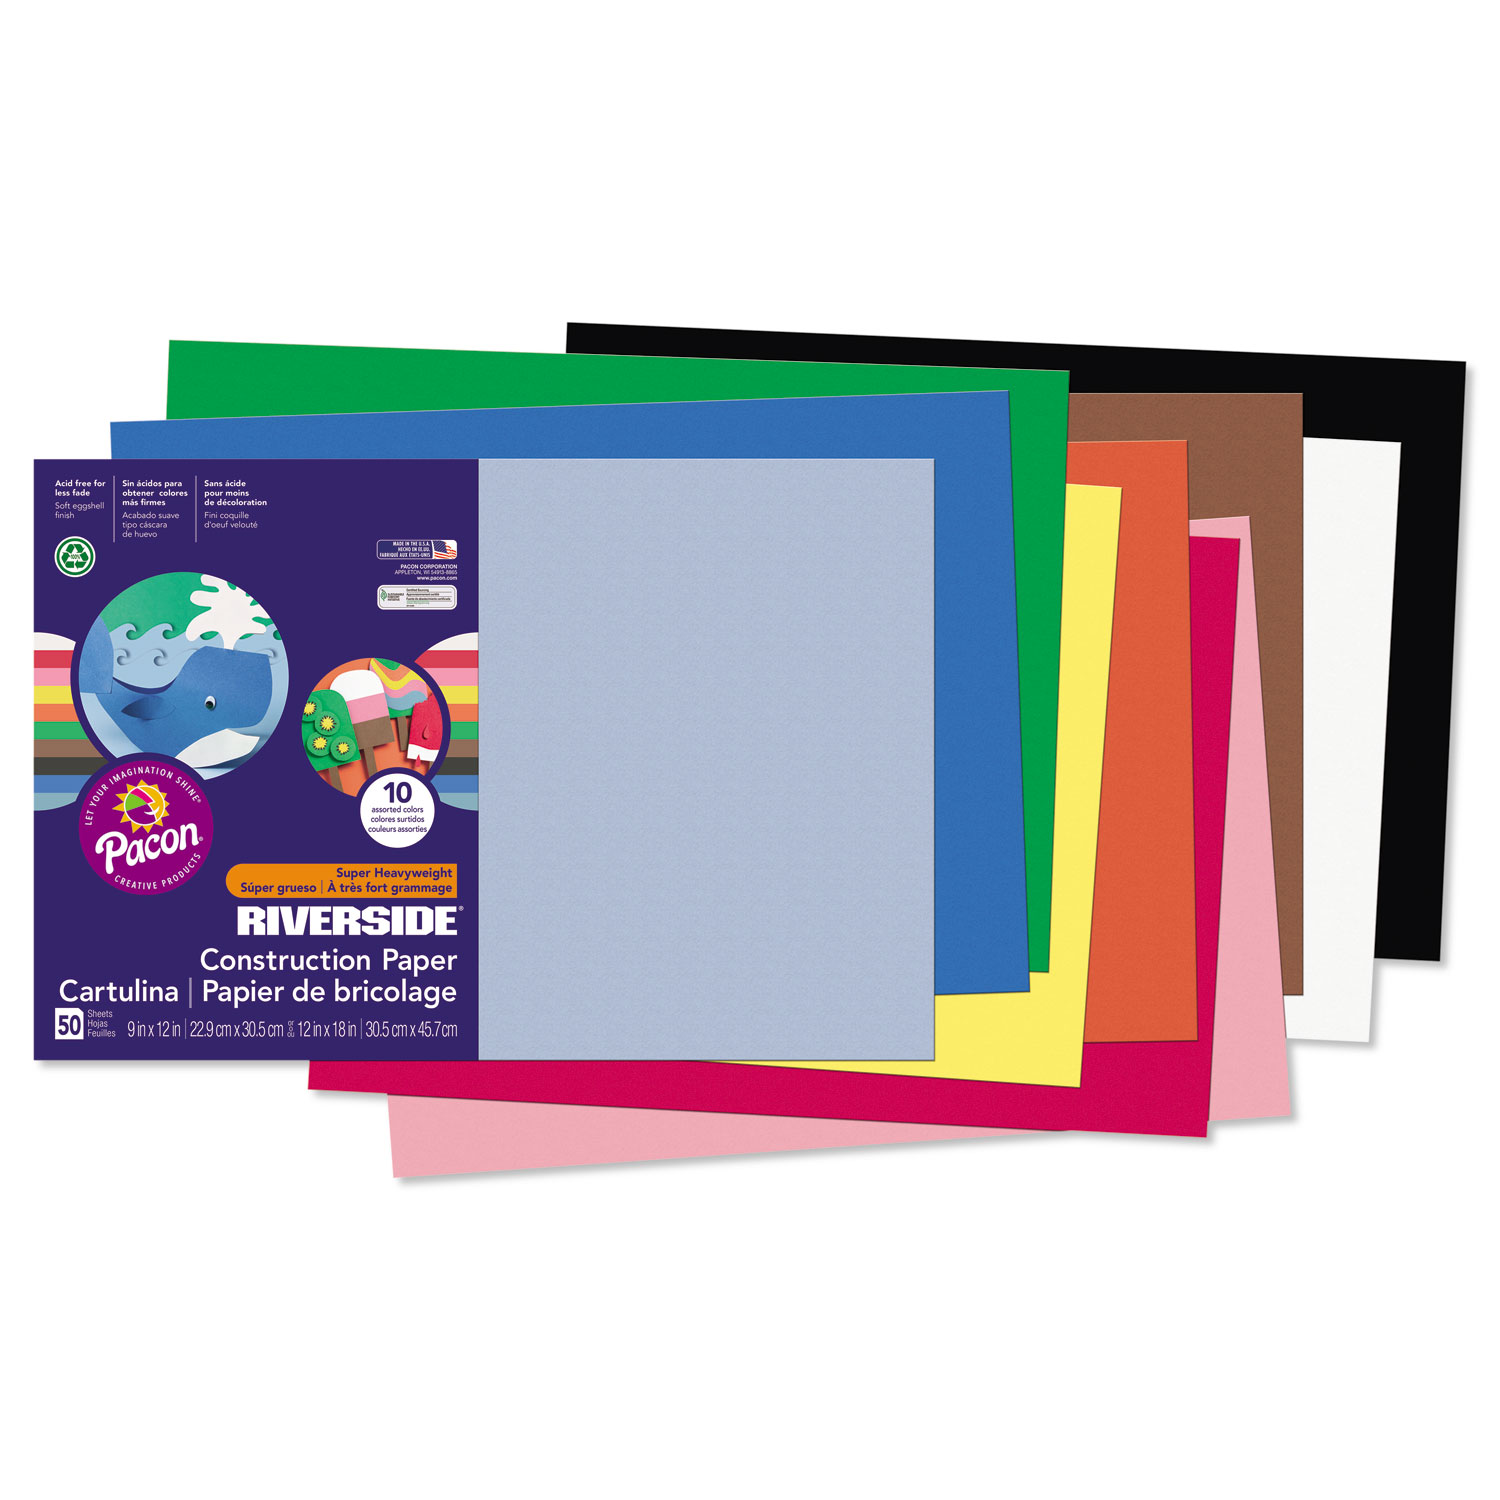  Pacon 103638 Riverside Construction Paper, 76lb, 12 x 18, Assorted, 50/Pack (PAC103638) 